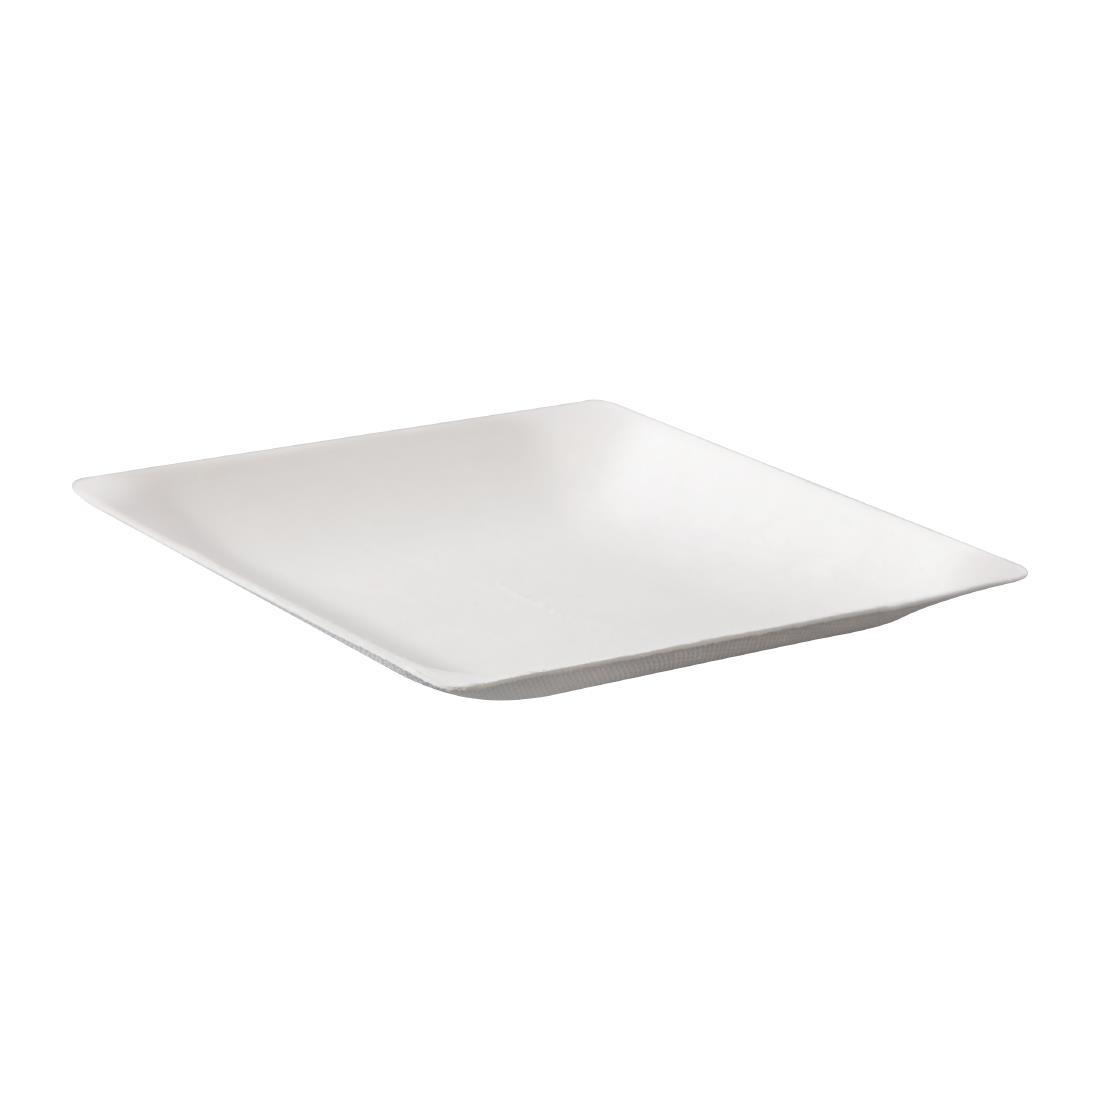 Solia Imagine Bagasse Square Plates 110mm (Pack of 10) - FC781  - 1